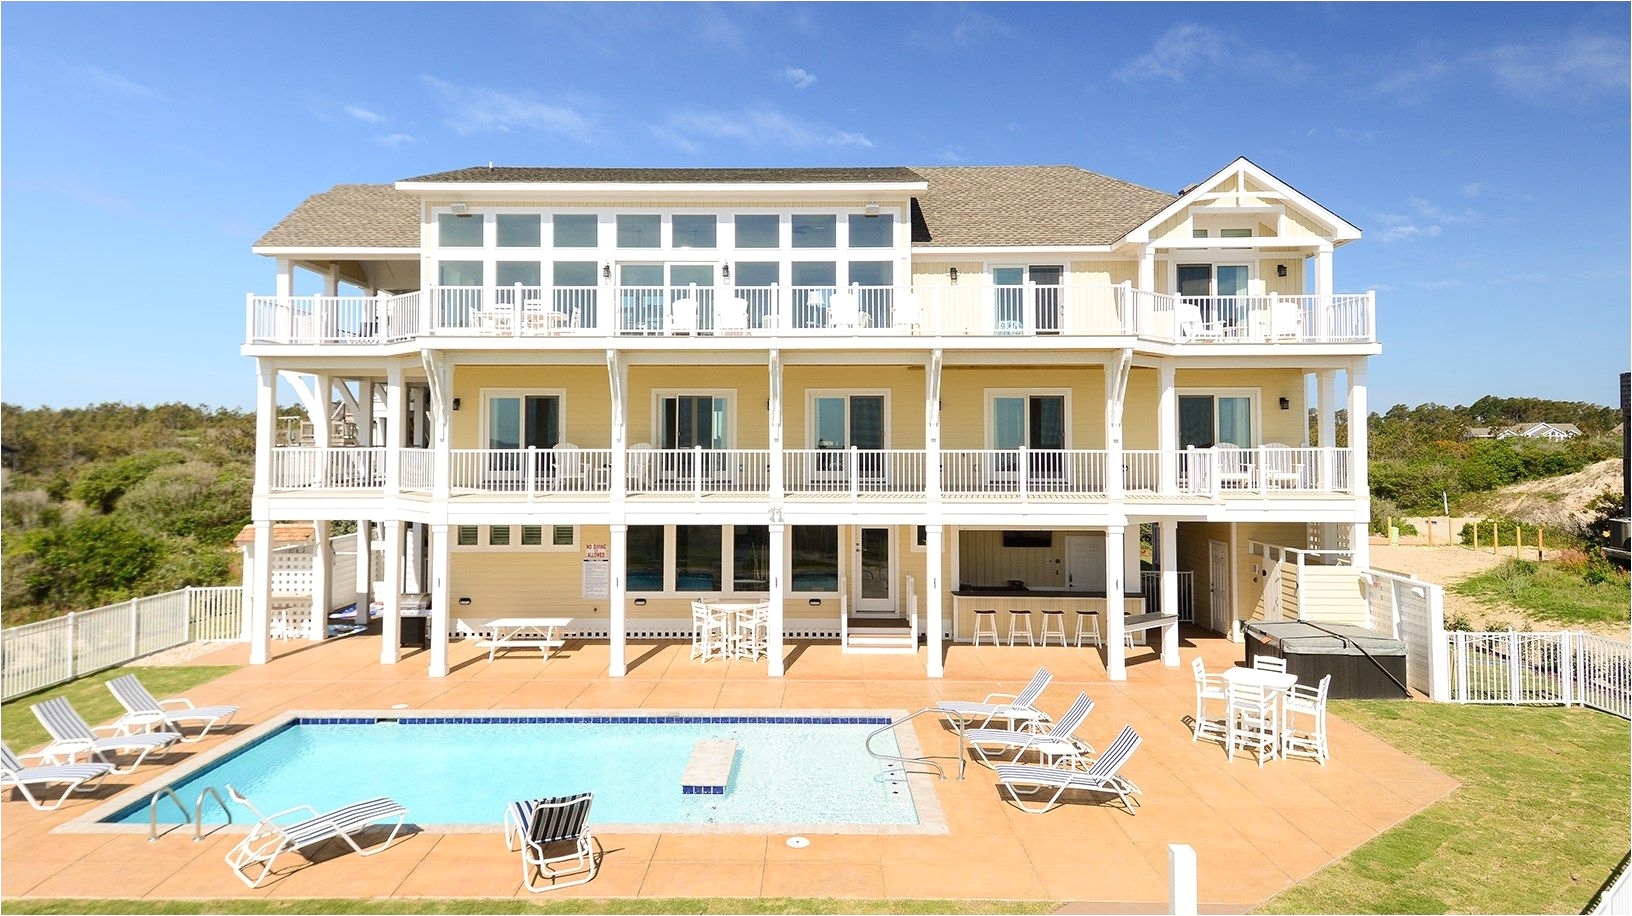 12 bedroom vacation rental virginia beach twiddy outer banks vacation home you are my sunshine corolla